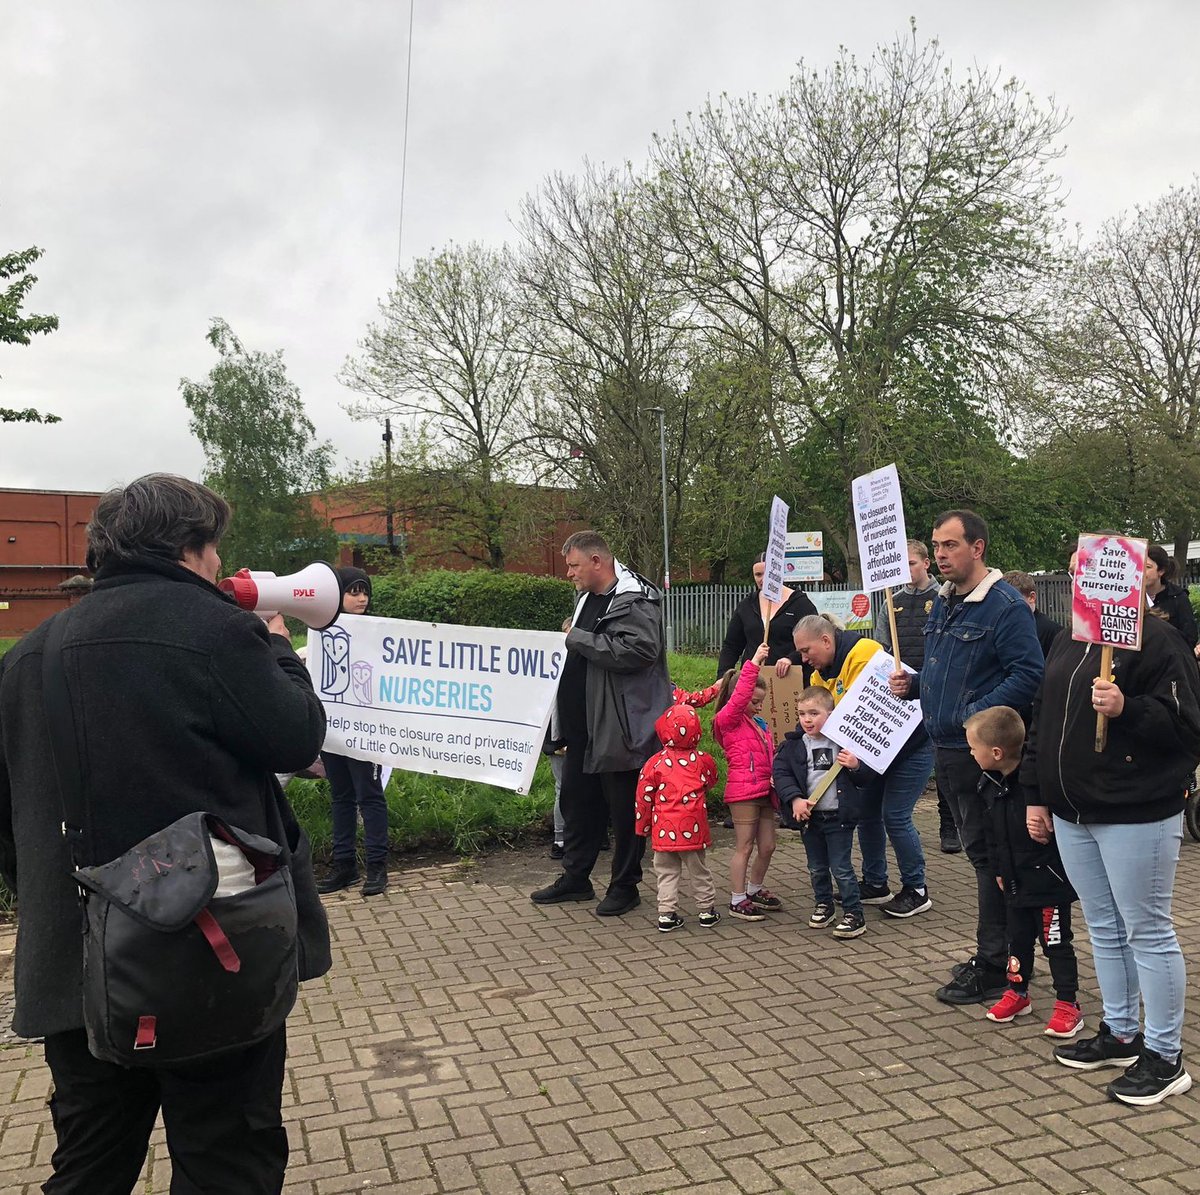 ✊✊✊We joined the latest Save Little Owls nurseries rally and march in Hunslet this morning 👉👉👉Check out our report of the previous demonstration in Gipton from the Socialist - socialistparty.org.uk/articles/12380… #savelittleowls #saveournurseries #leeds #hunslet #stopthecuts